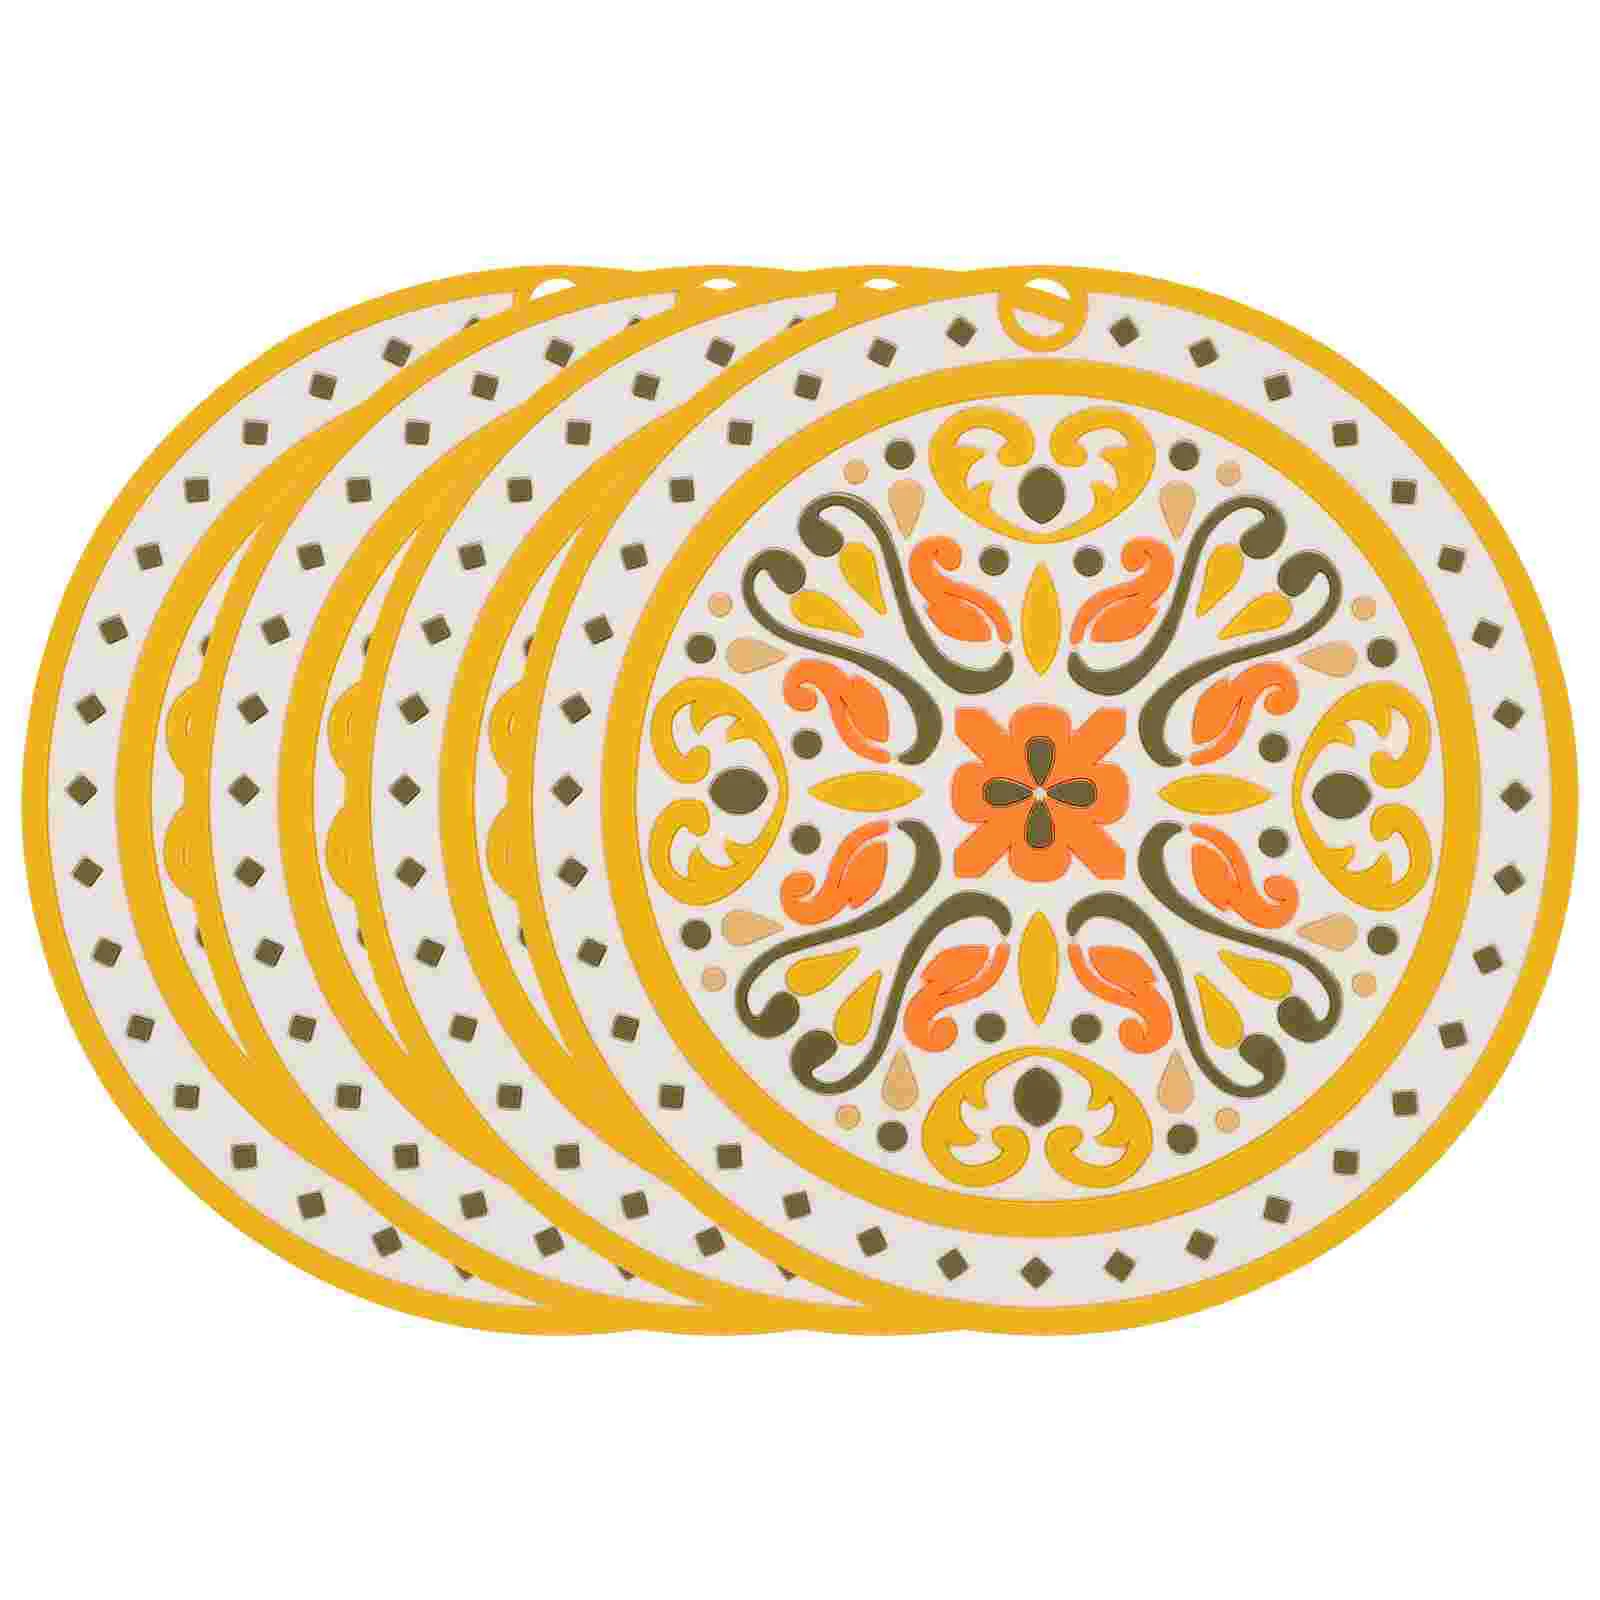 

Placemats Table Mats Ethnic Decorative Floral Resistant Heat Dinner Dish Dining Placemat Pvc Coasters Mandala Round Wipeable